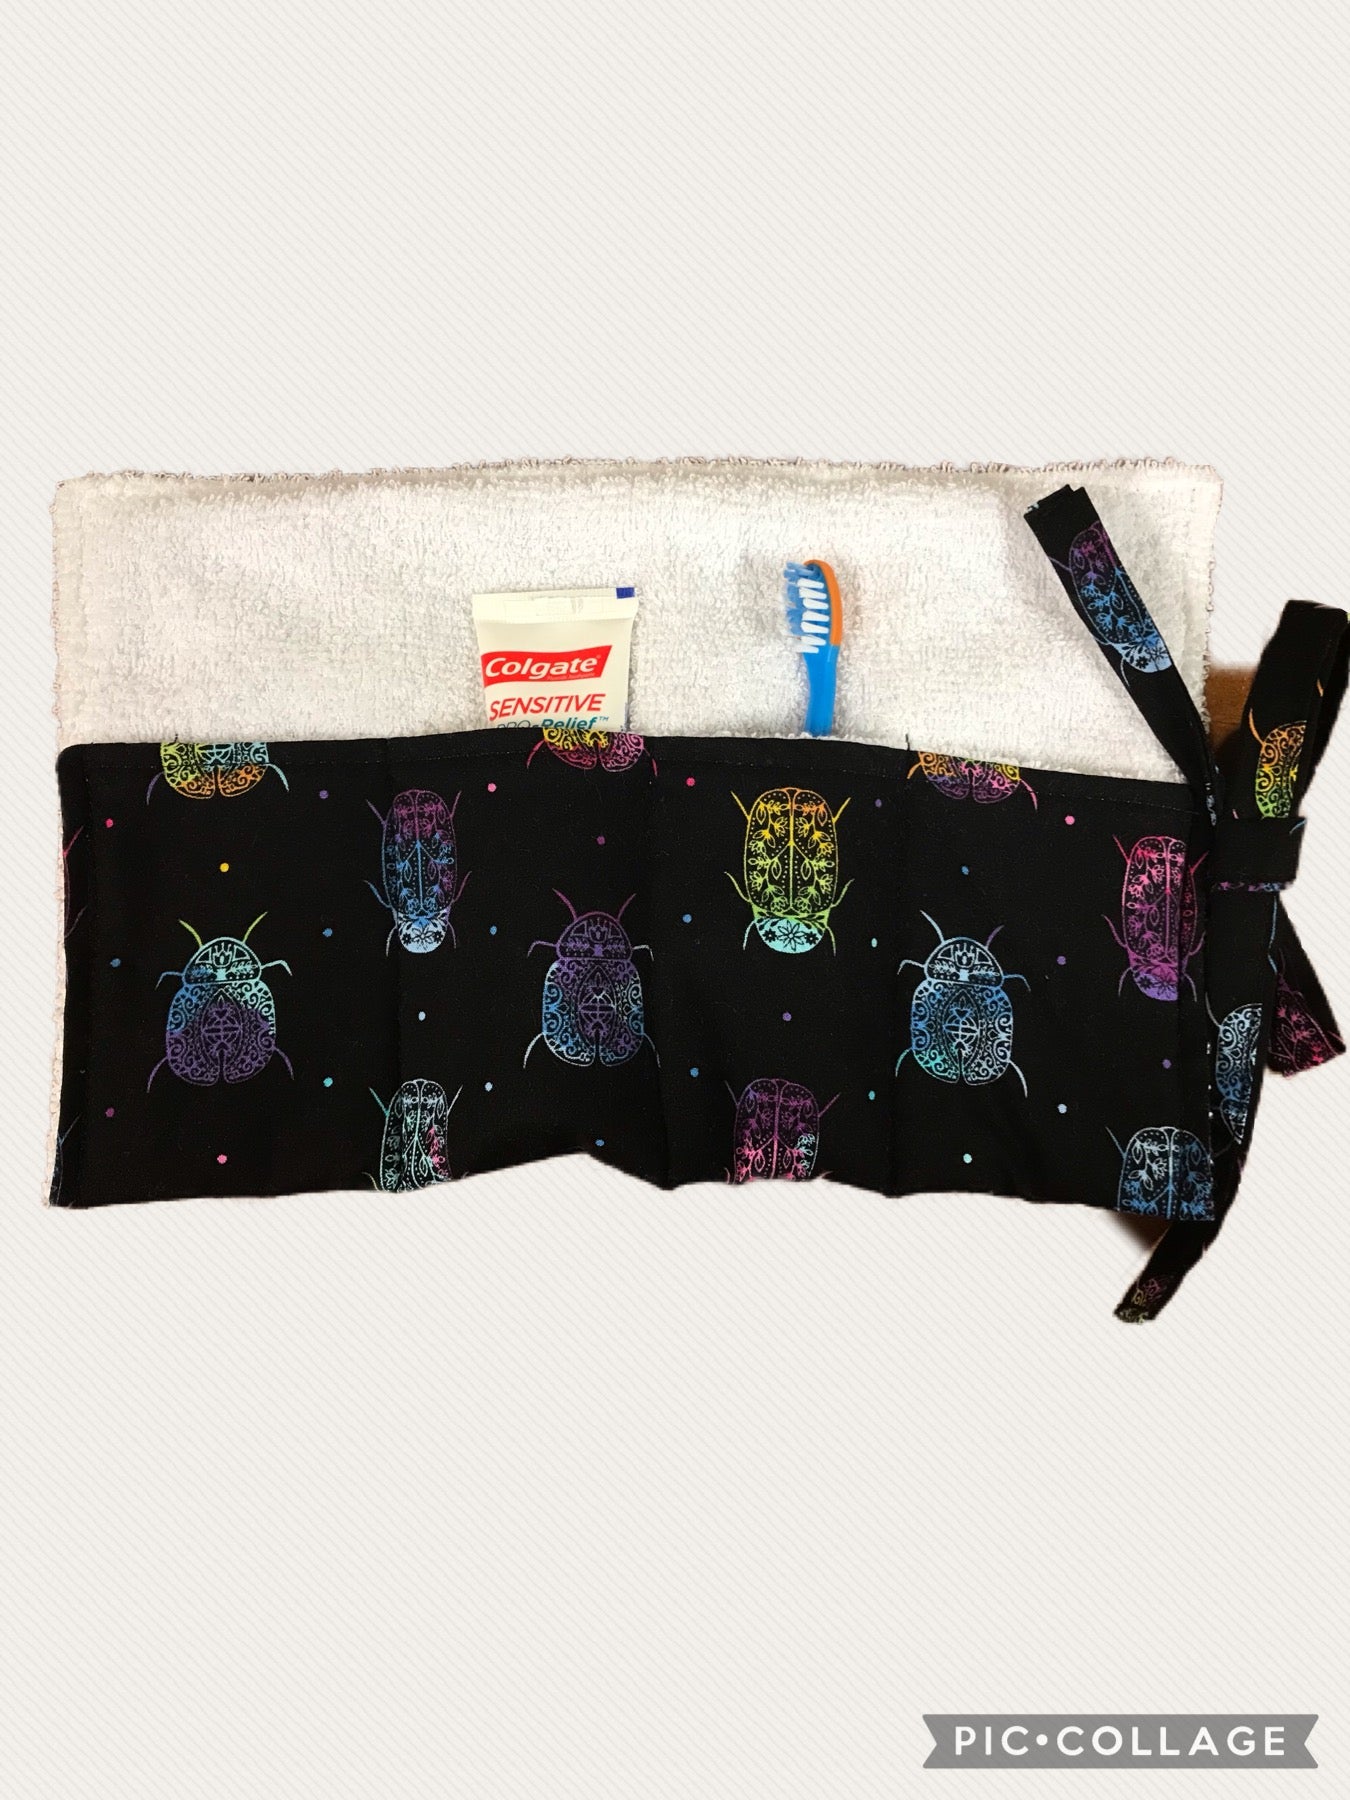 Children’s toothbrush and toothpaste travel wrap